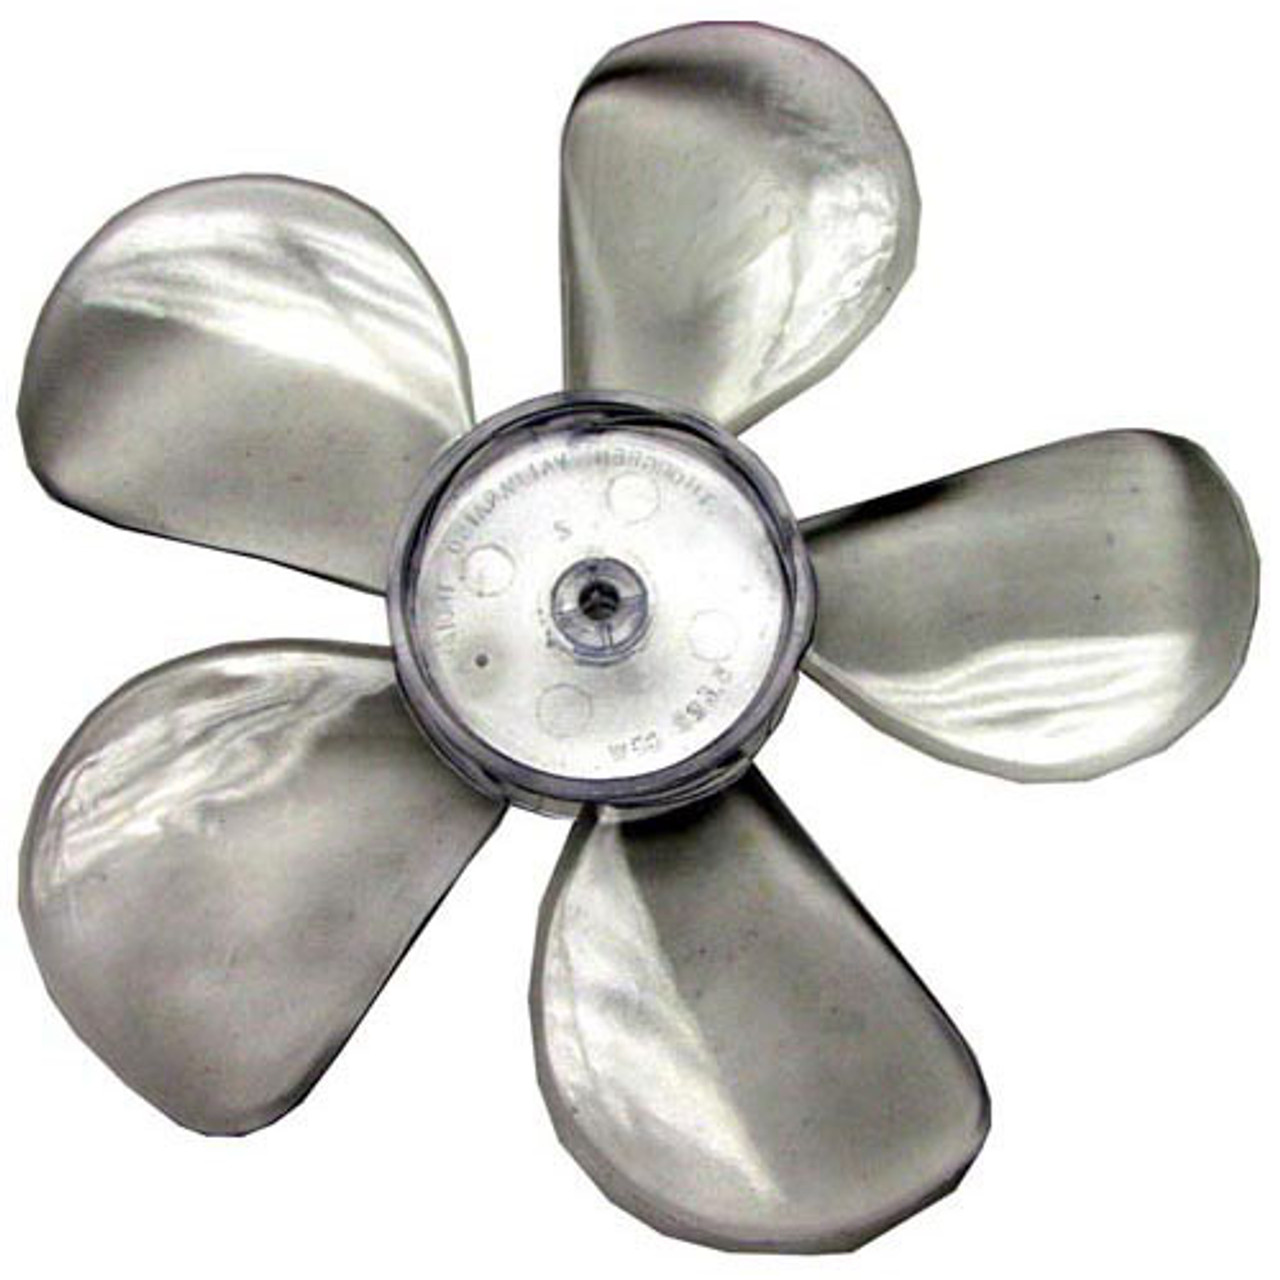 Fan Blade 5 1/2", Ccw - Replacement Part For Peerless 2997